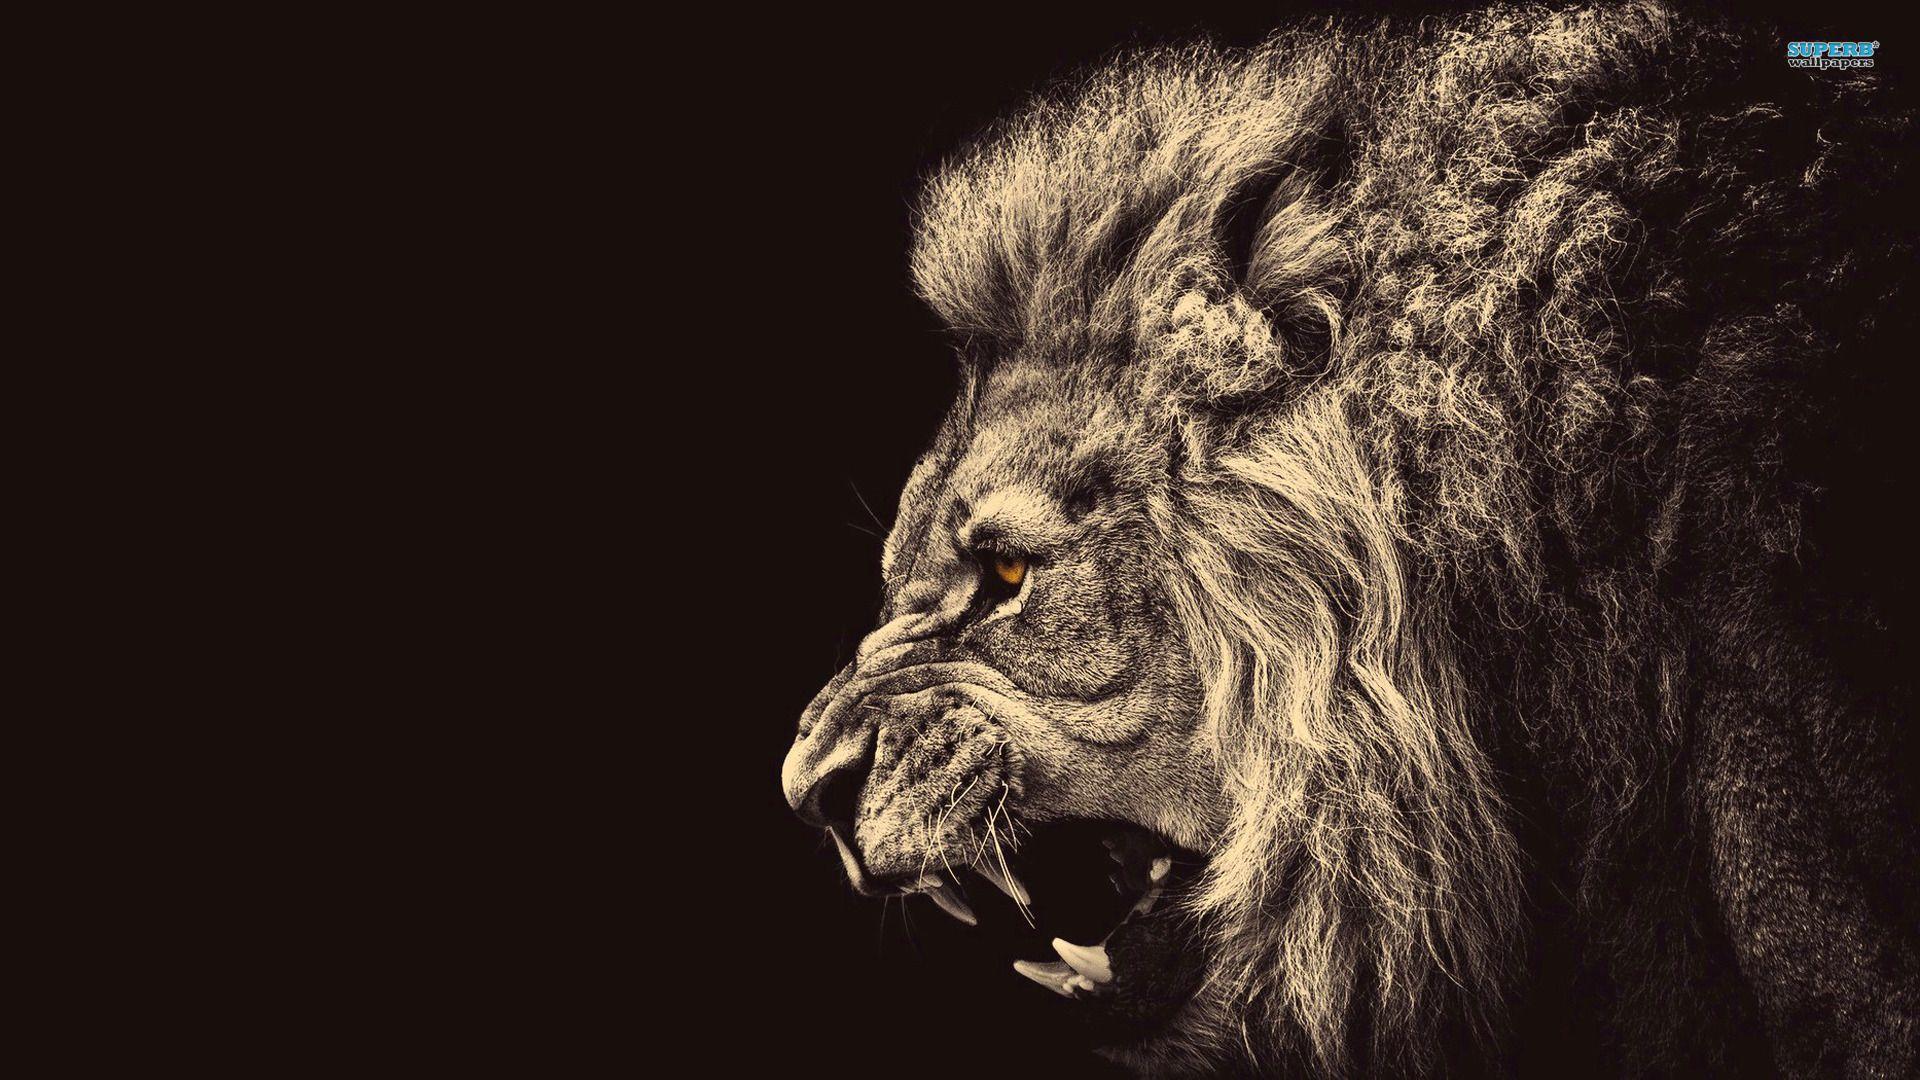 1920 x 1080 · jpeg - Pin by wall_lucky on SAY HELLO TO THE PREDATORS | Lion hd wallpaper ...